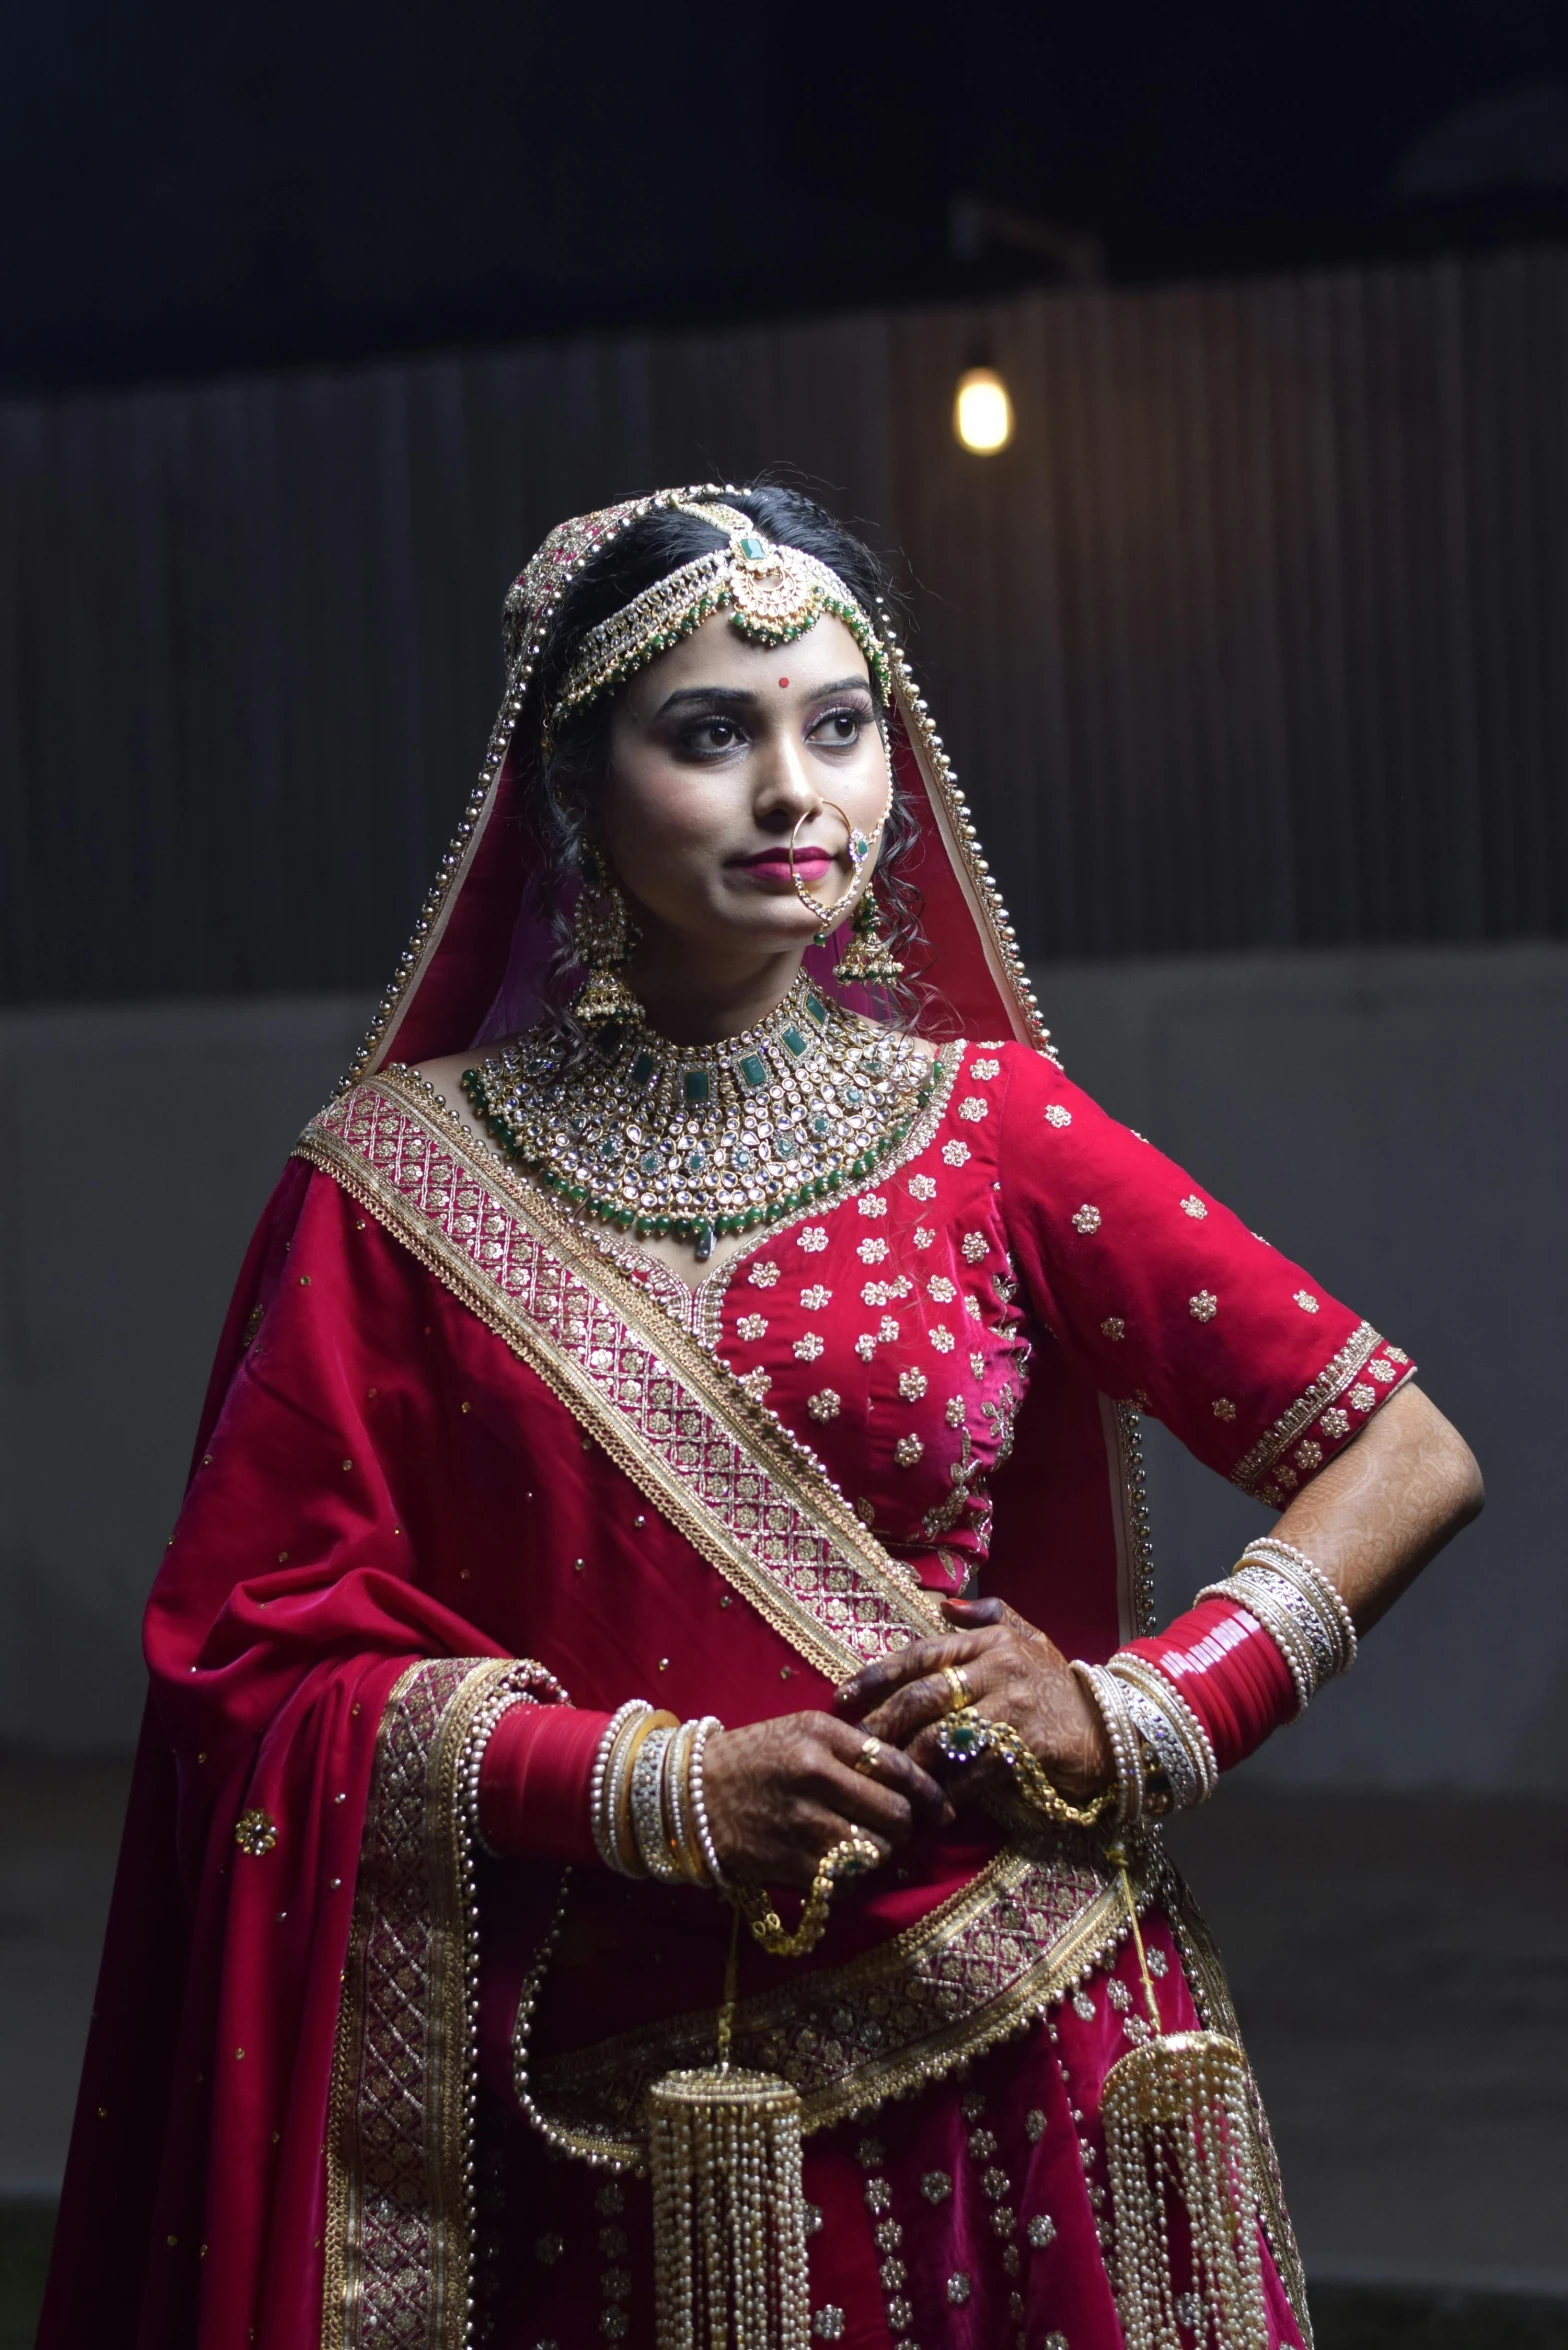 a woman wearing a red and gold indian wedding outfit